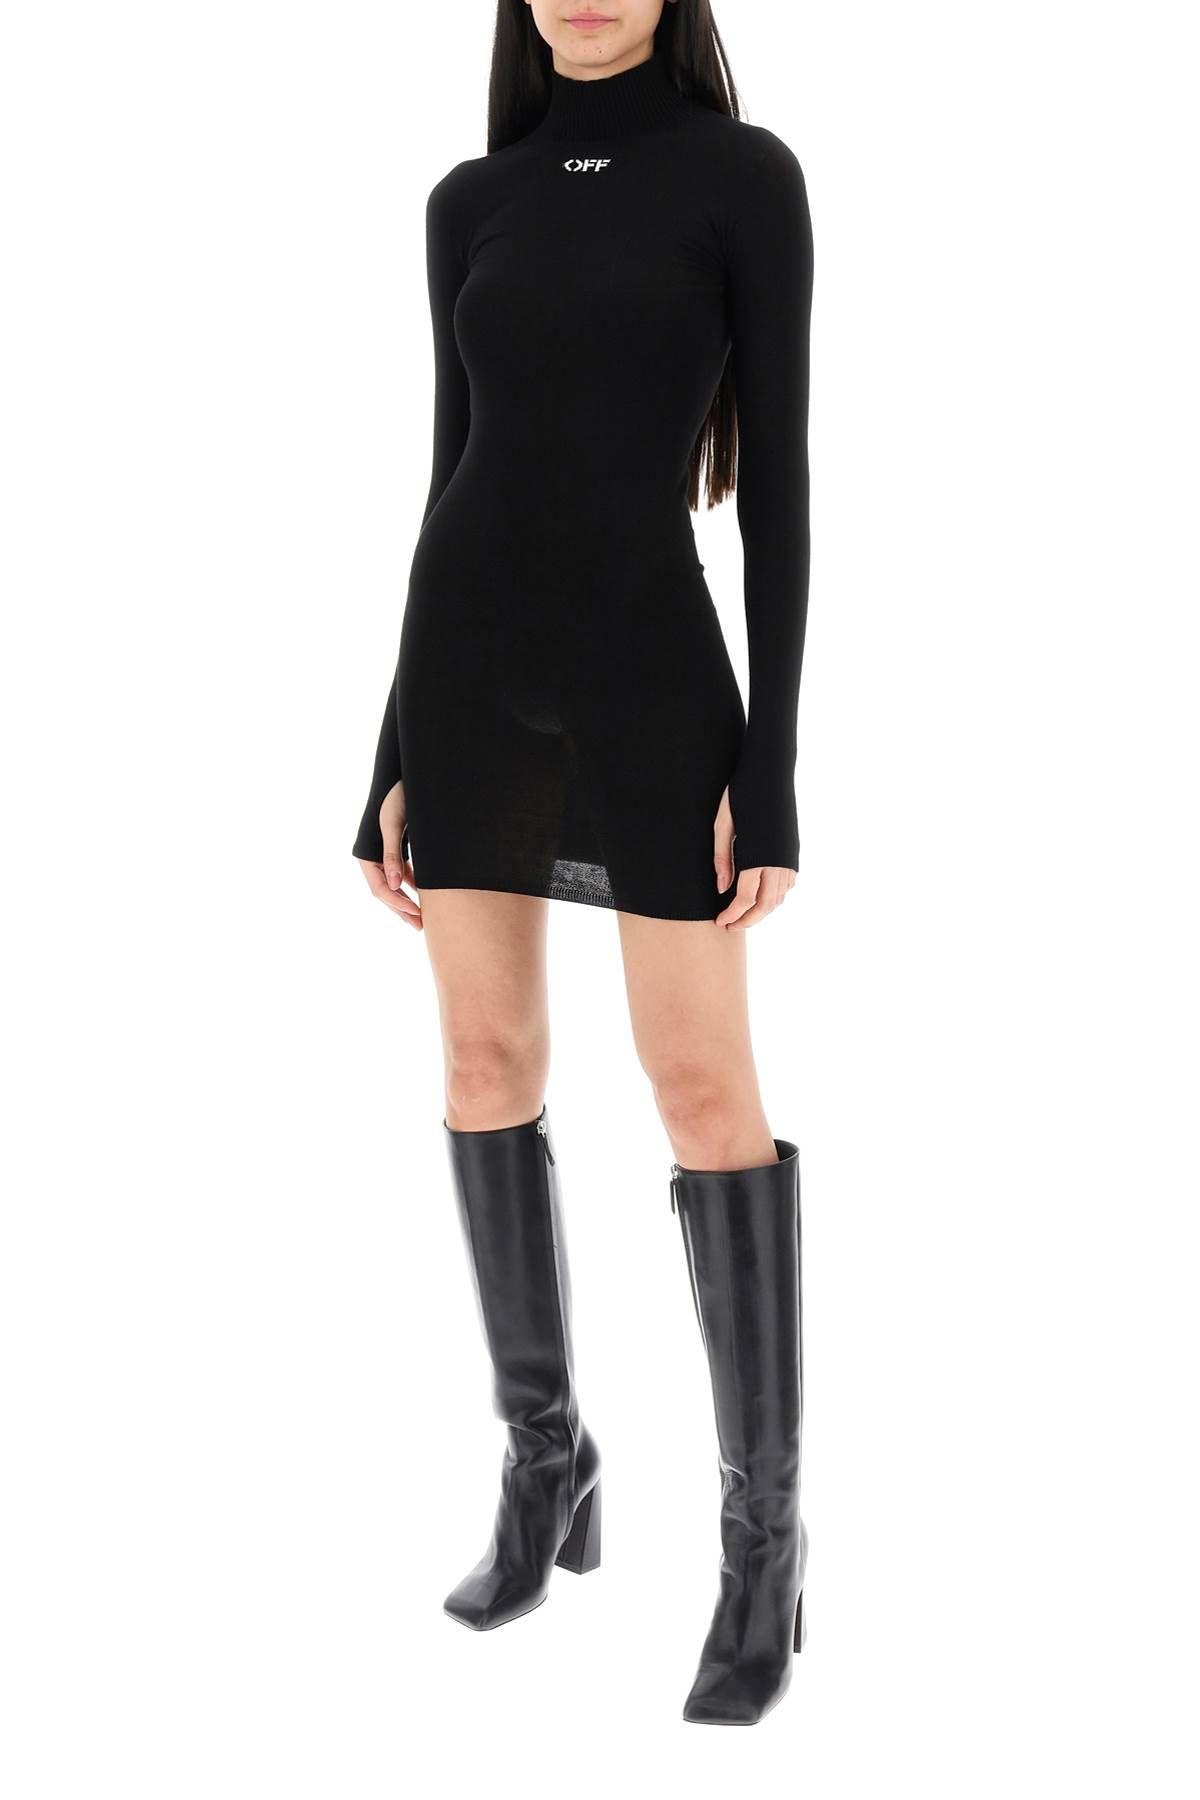 Knitted mini dress with OFF logo Off-white - 2